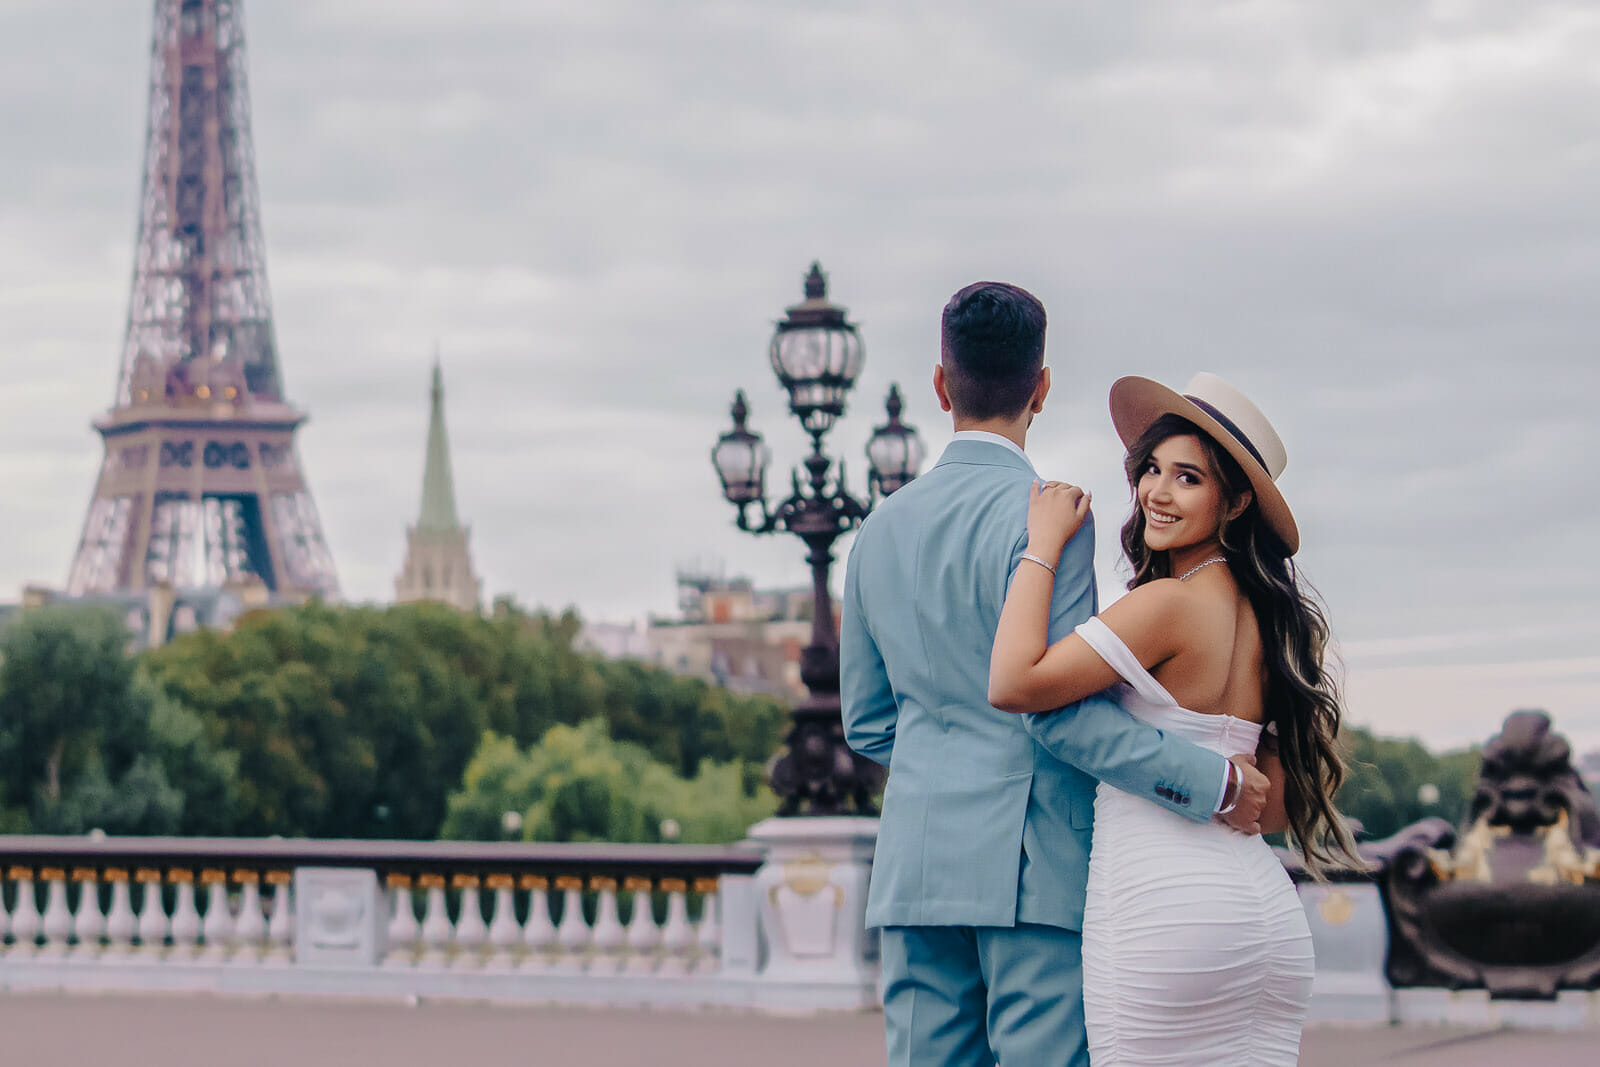 Couple photoshoot in Paris at Alexander III Bridge with Eiffel Tower view